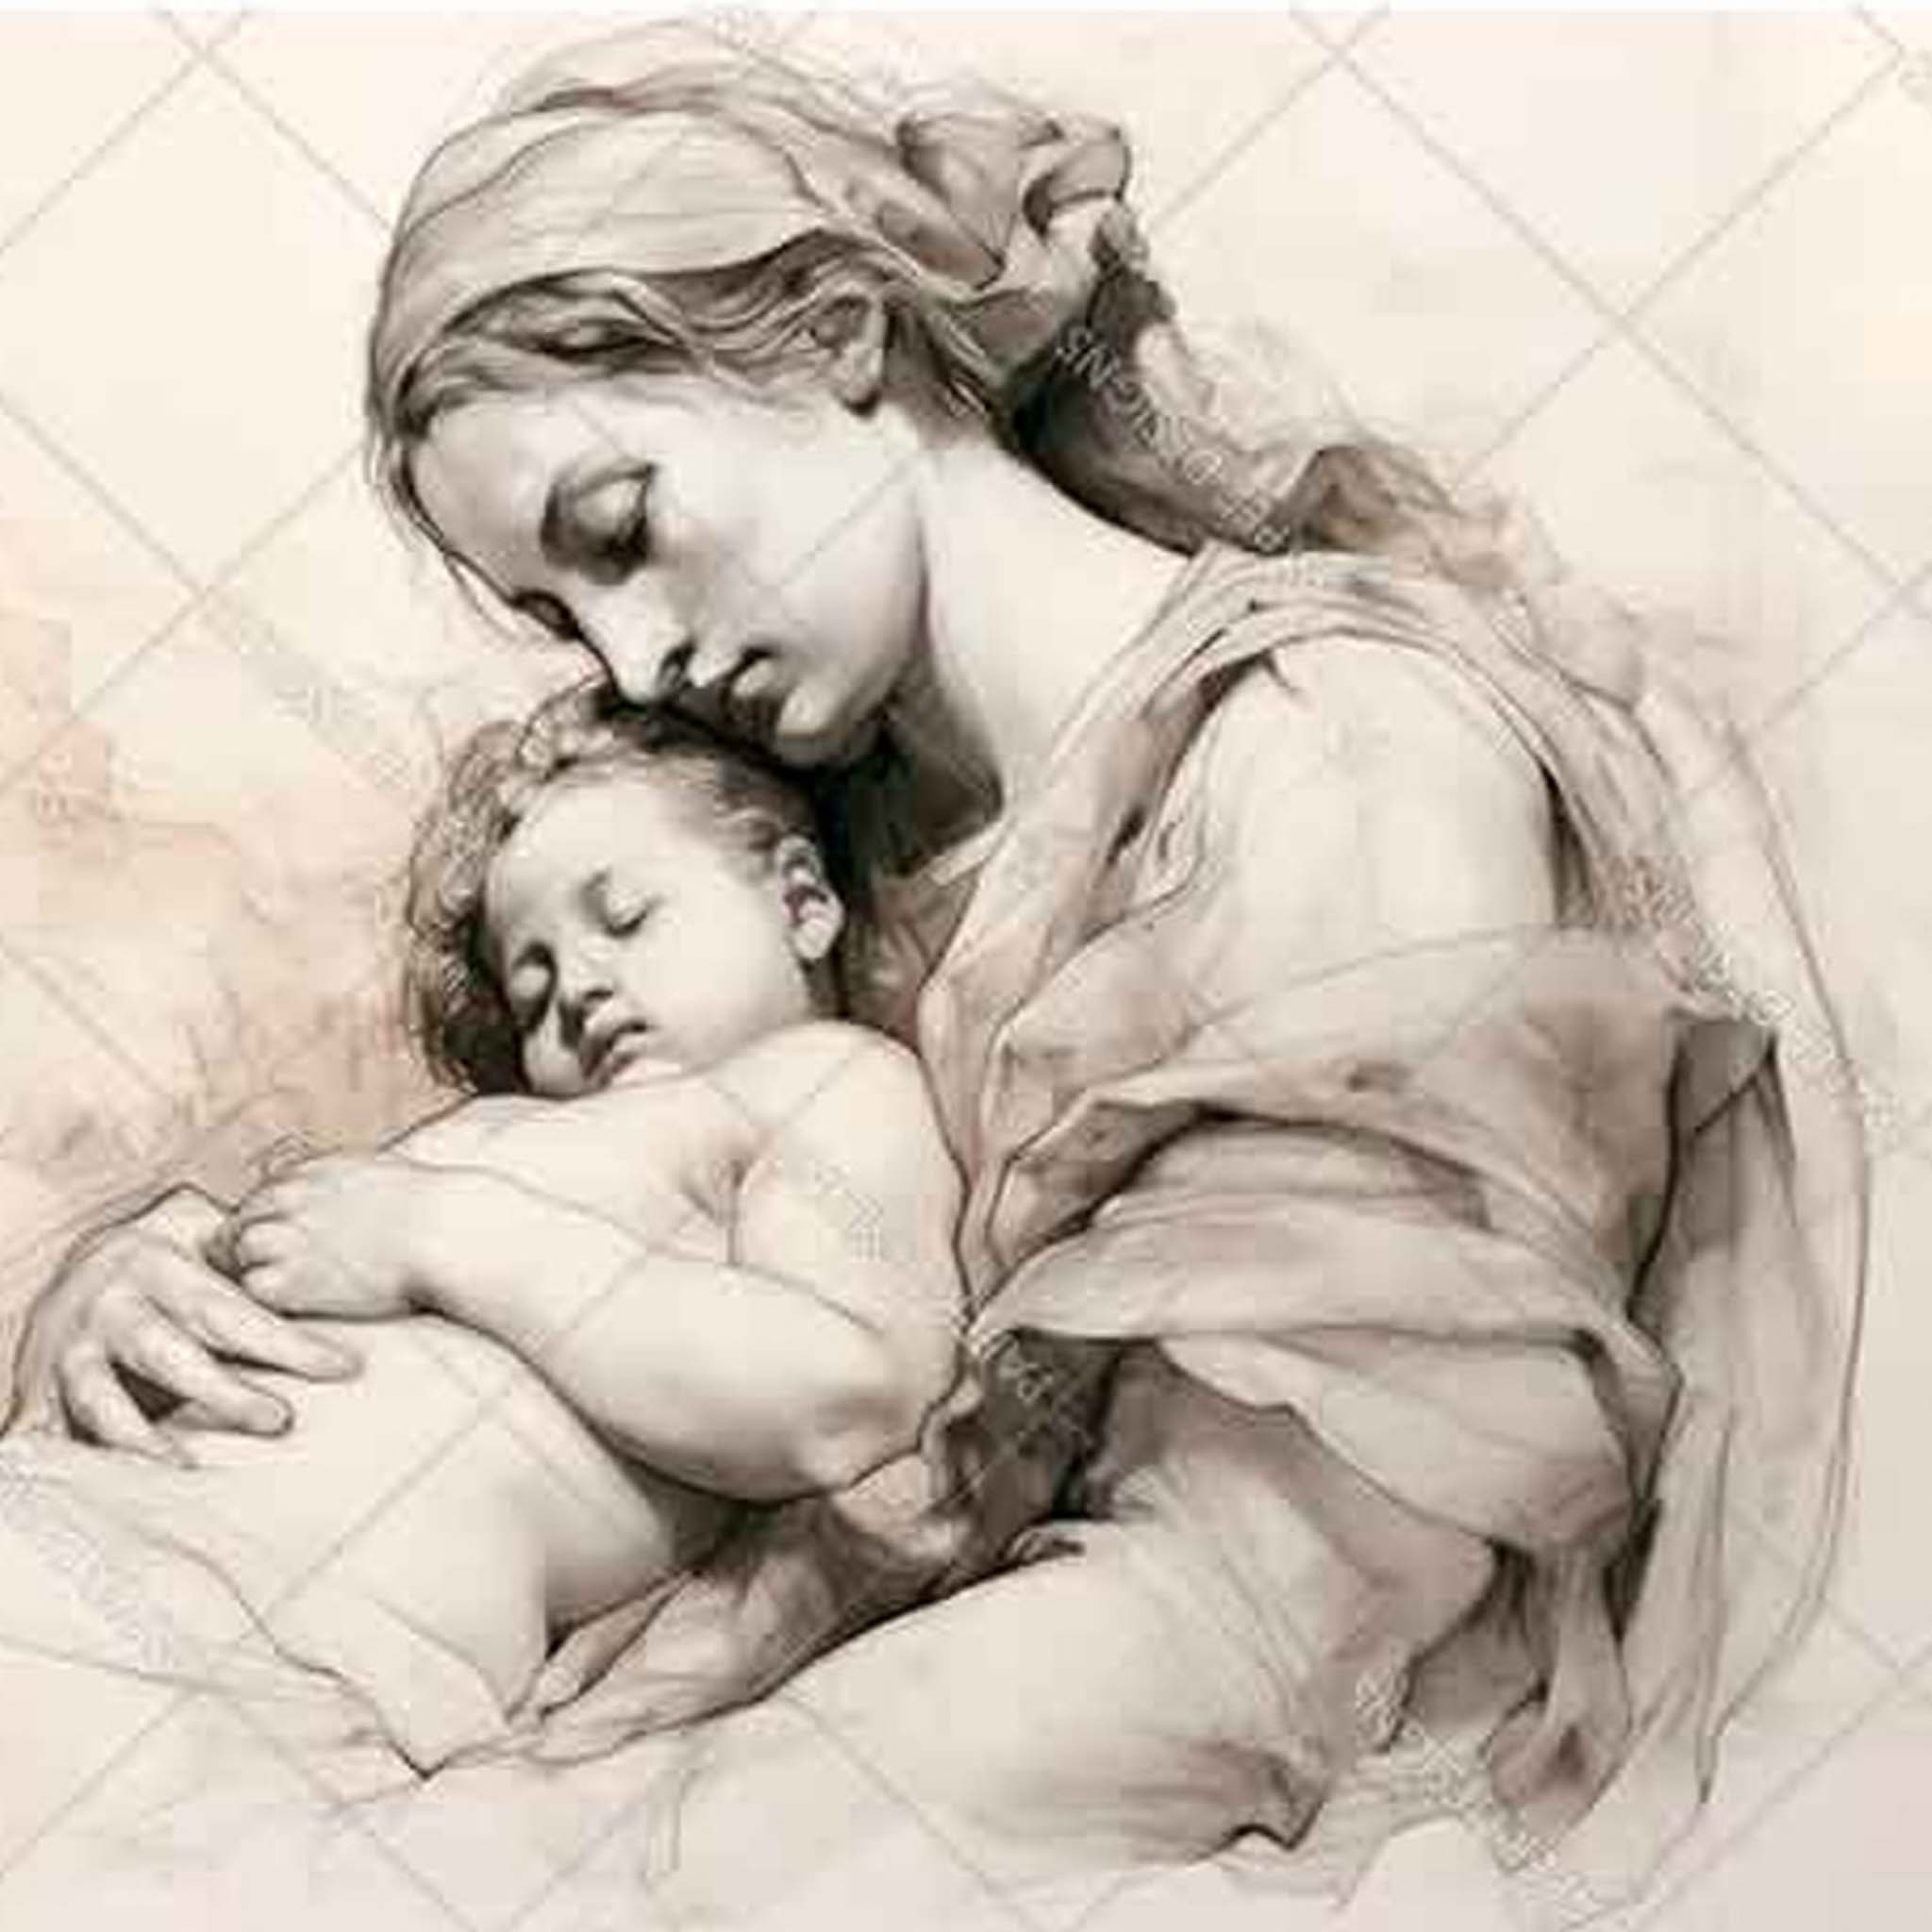 Close-up of an A4 rice paper design featuring a stunning pencil drawing of Mary holding a sleeping baby, sharing a tender moment.